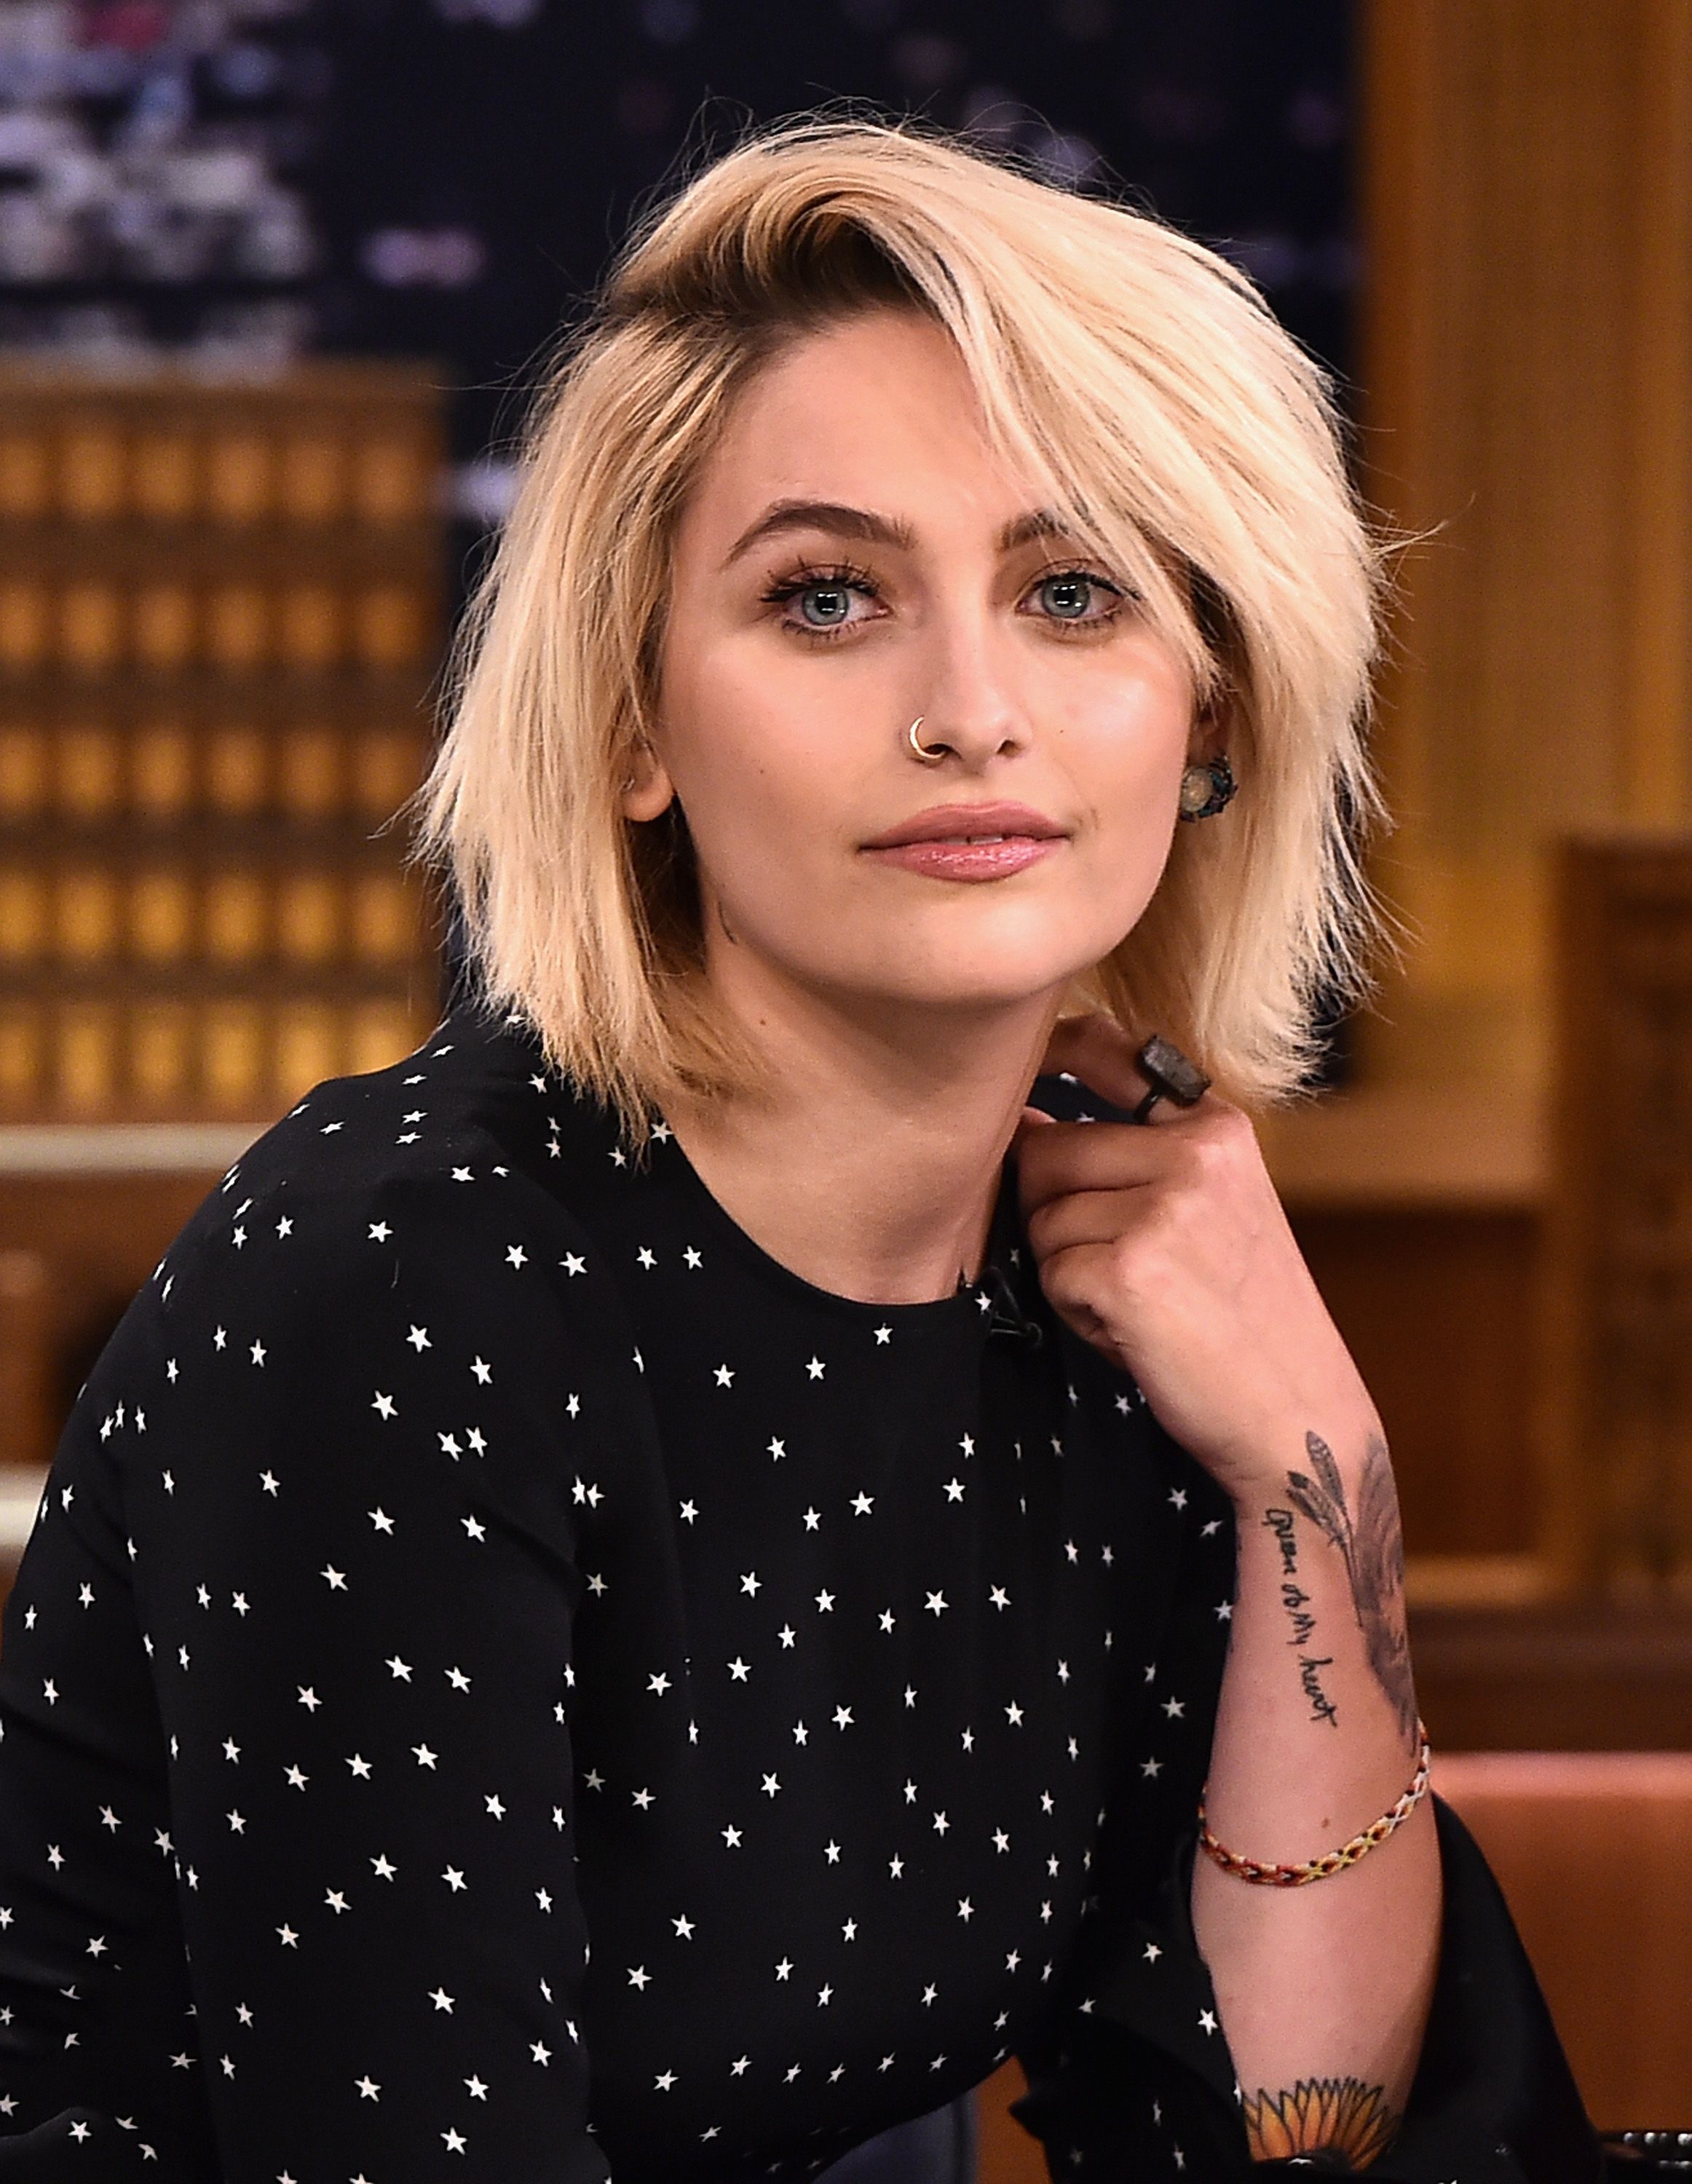 Paris Jackson graces "The Tonight Show with Jimmy Fallon" in 2017 in New York City. | Photo: Getty Images